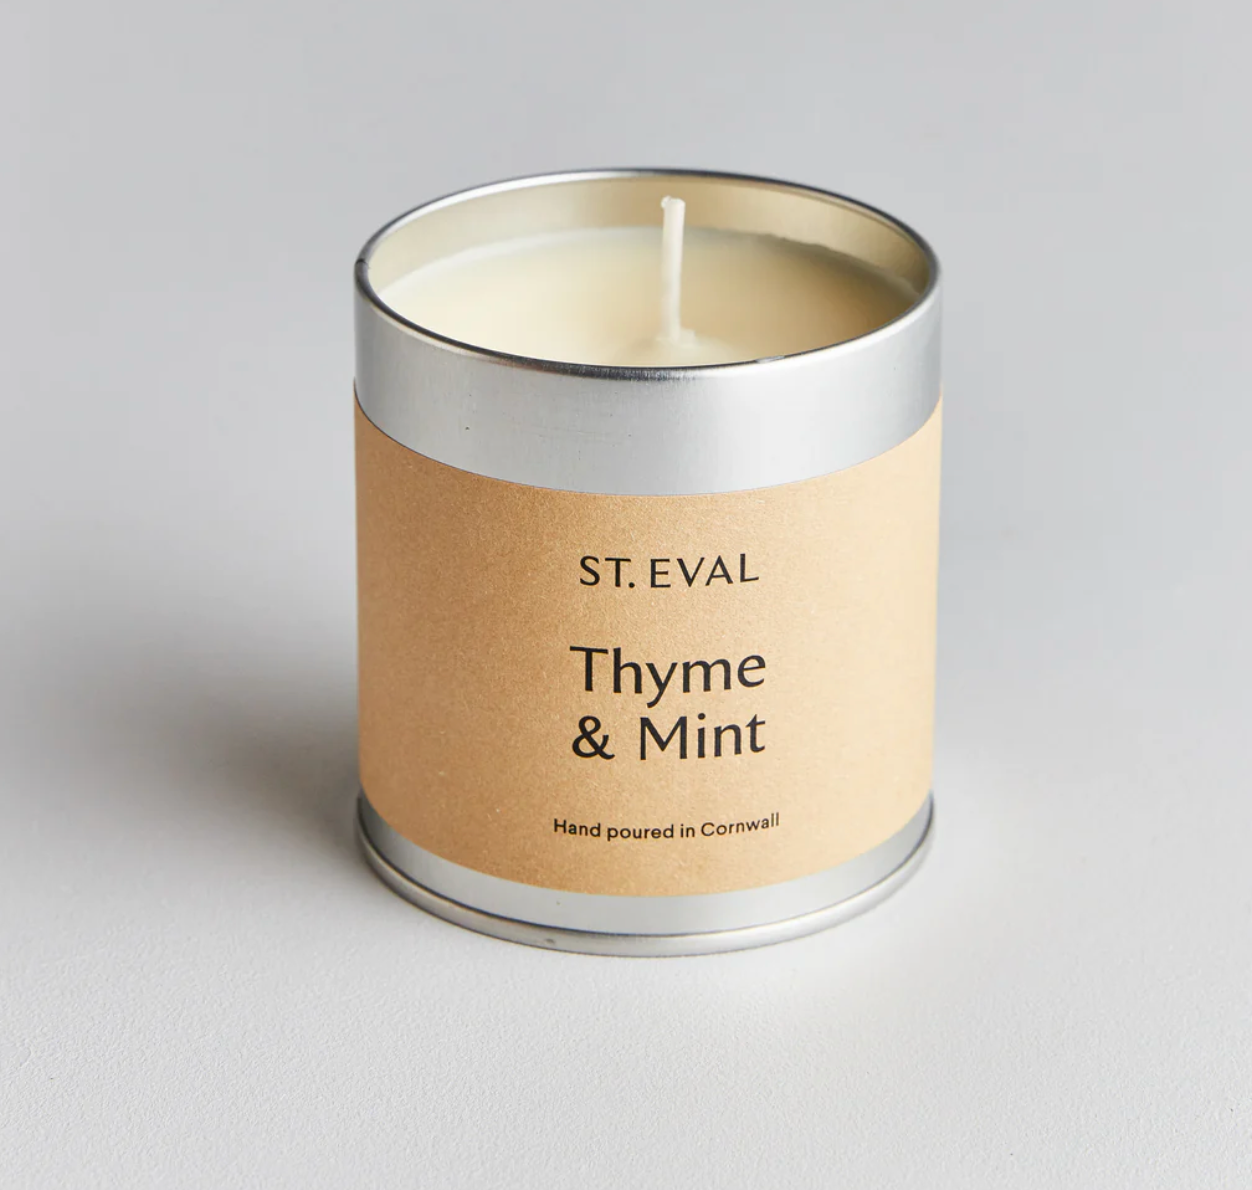 St Eval Thyme & Mint Scented Tin Candle